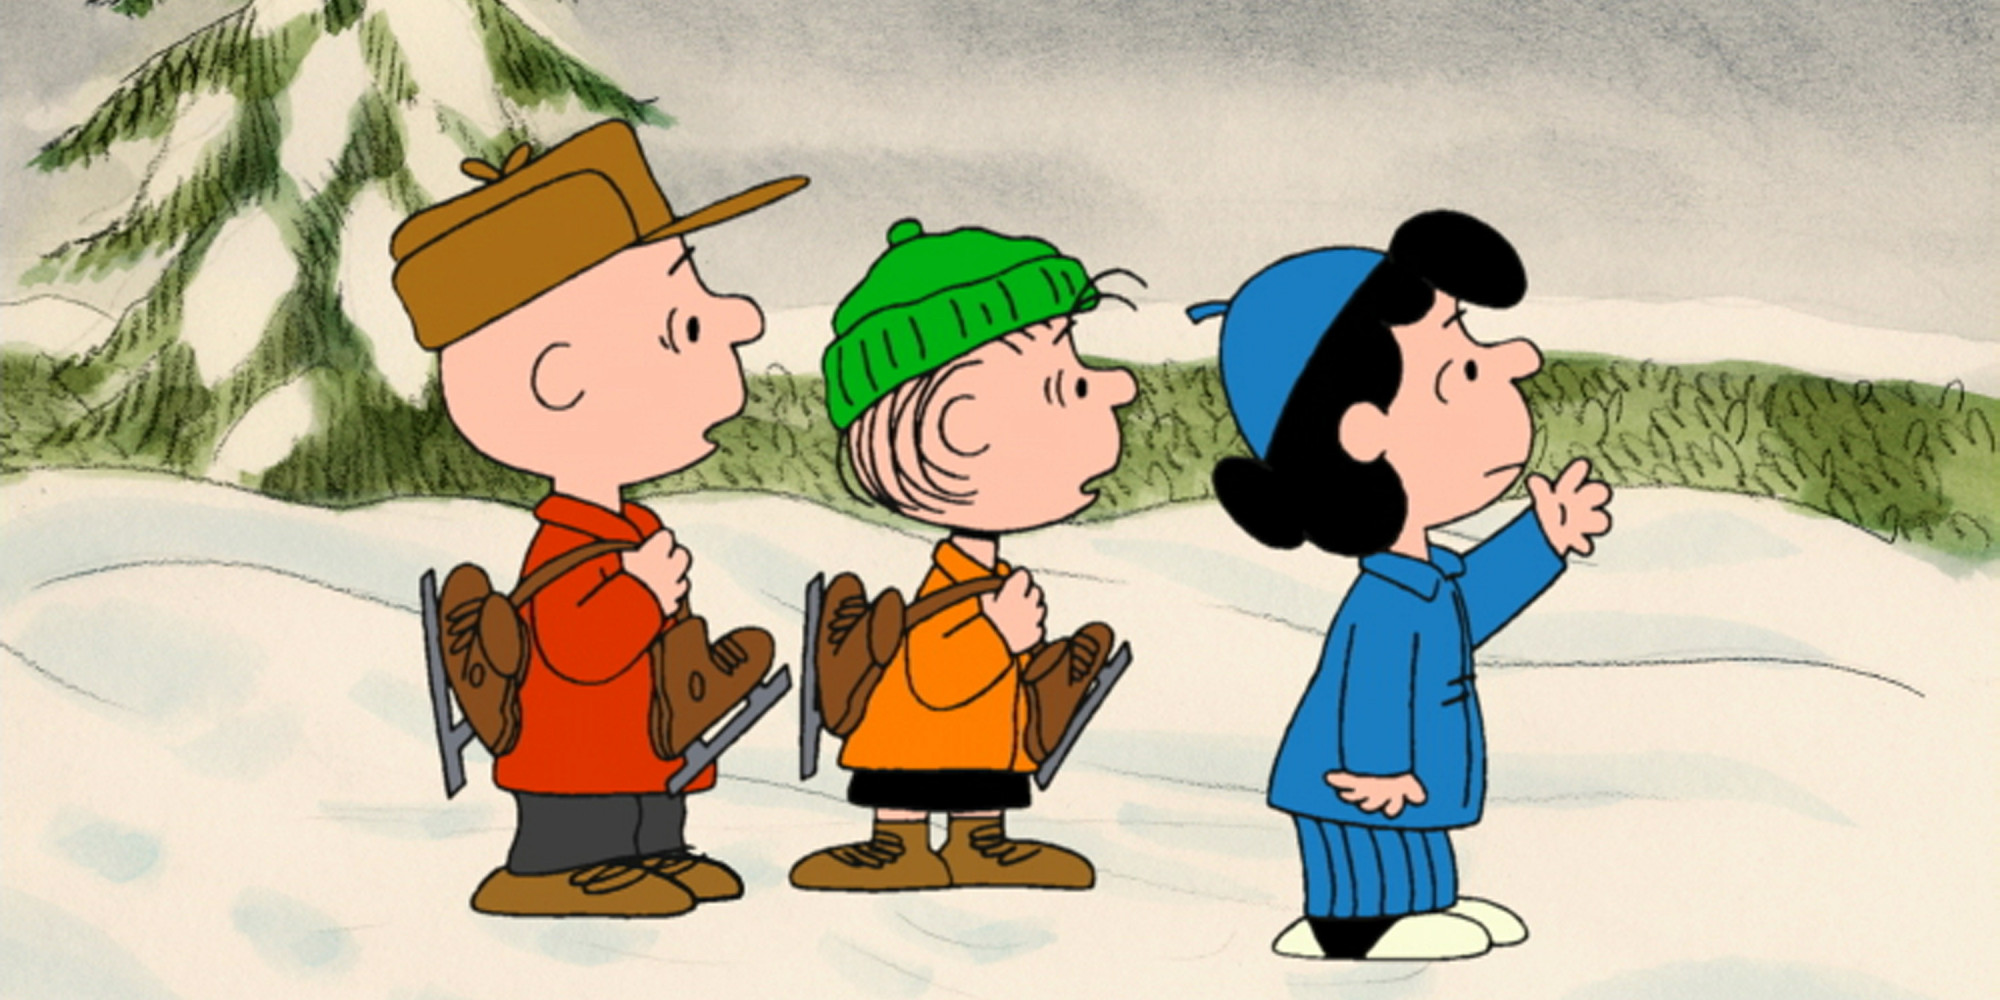 20 Things You Didn't Know About Charles Schulz